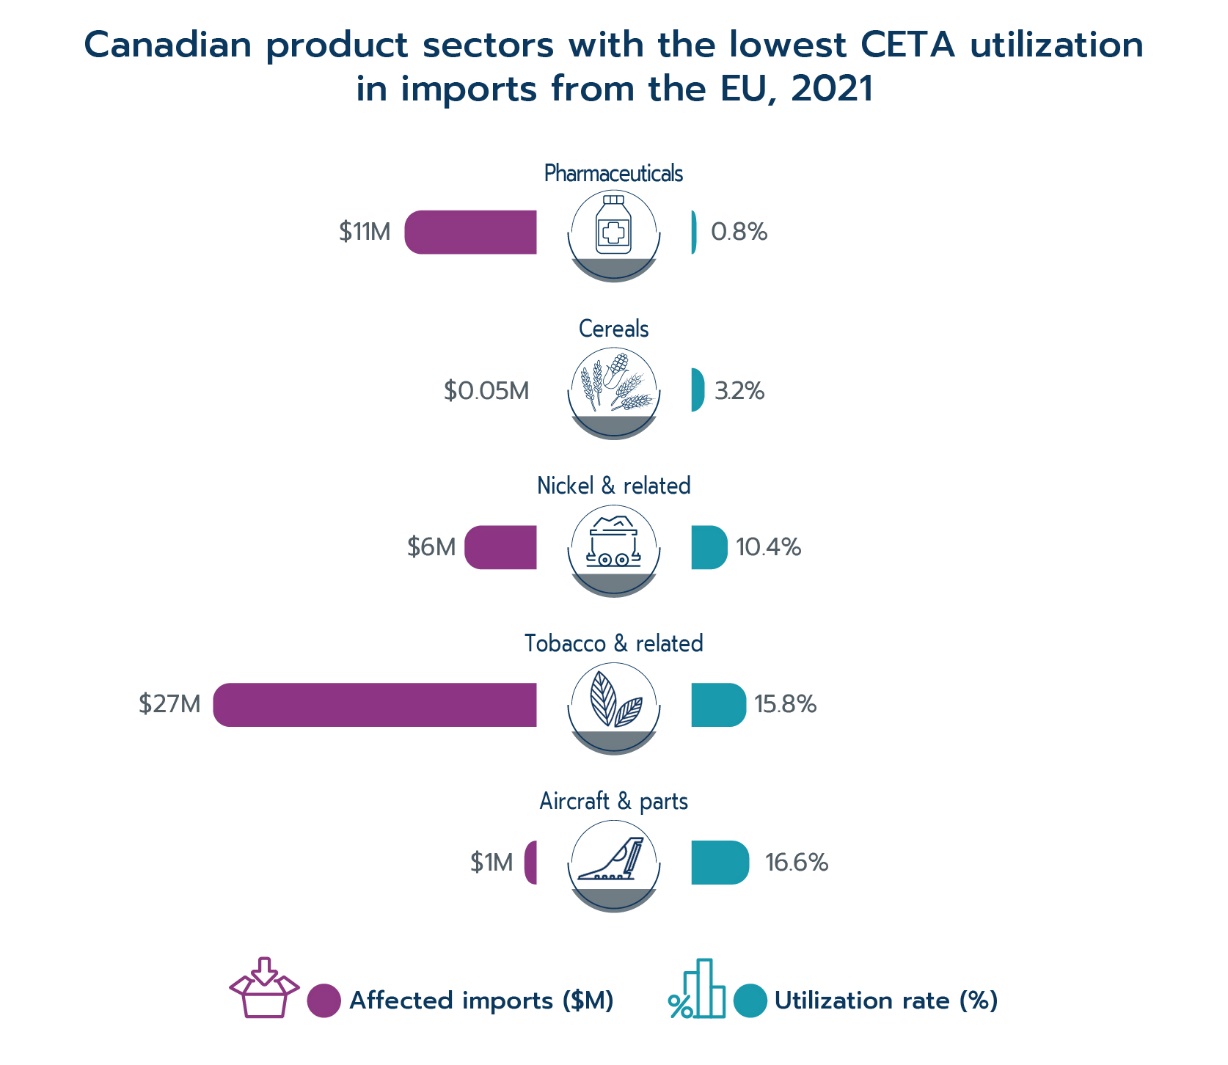 Canadian product sectors with the lowest CETA utilization in imports from the EU, 2021